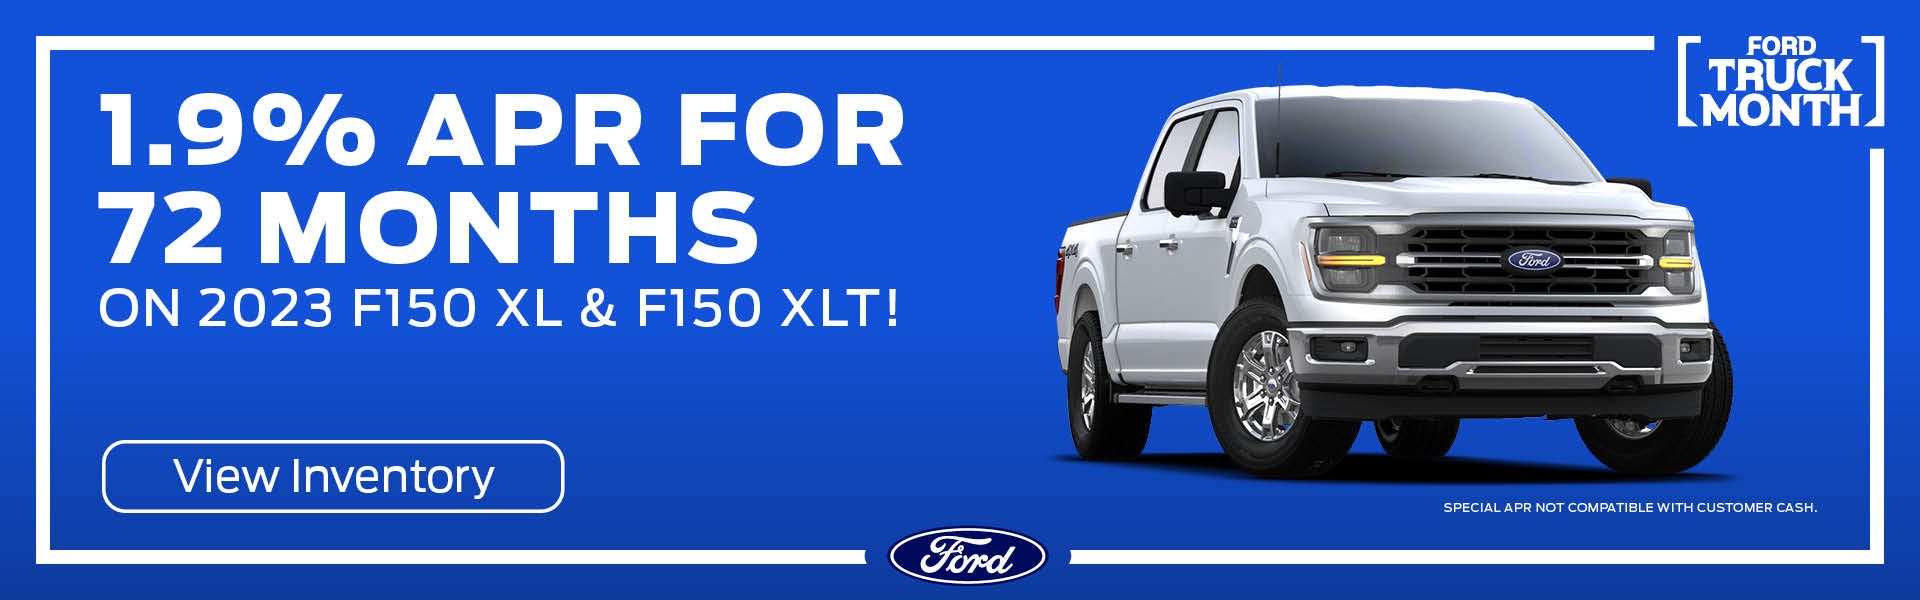 1.9% APR for 72 Months 2023 F-150